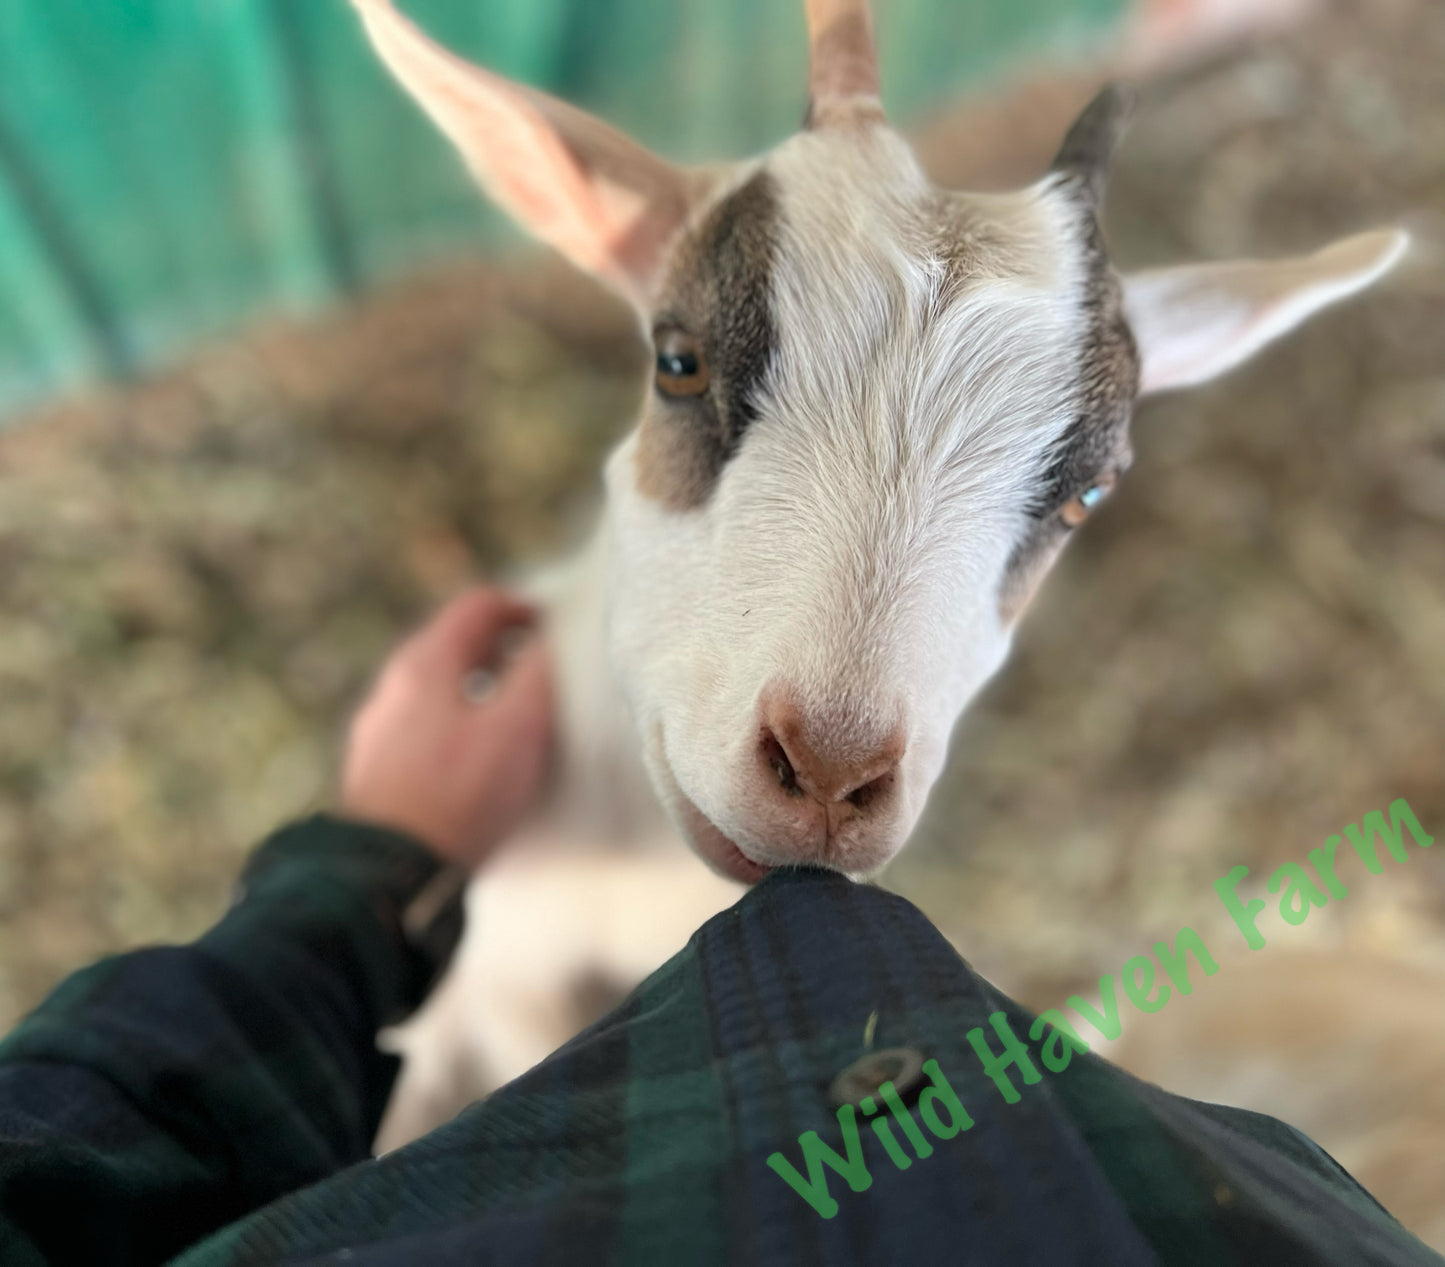 Goat looking up at the camera eating the button from a person's shirt